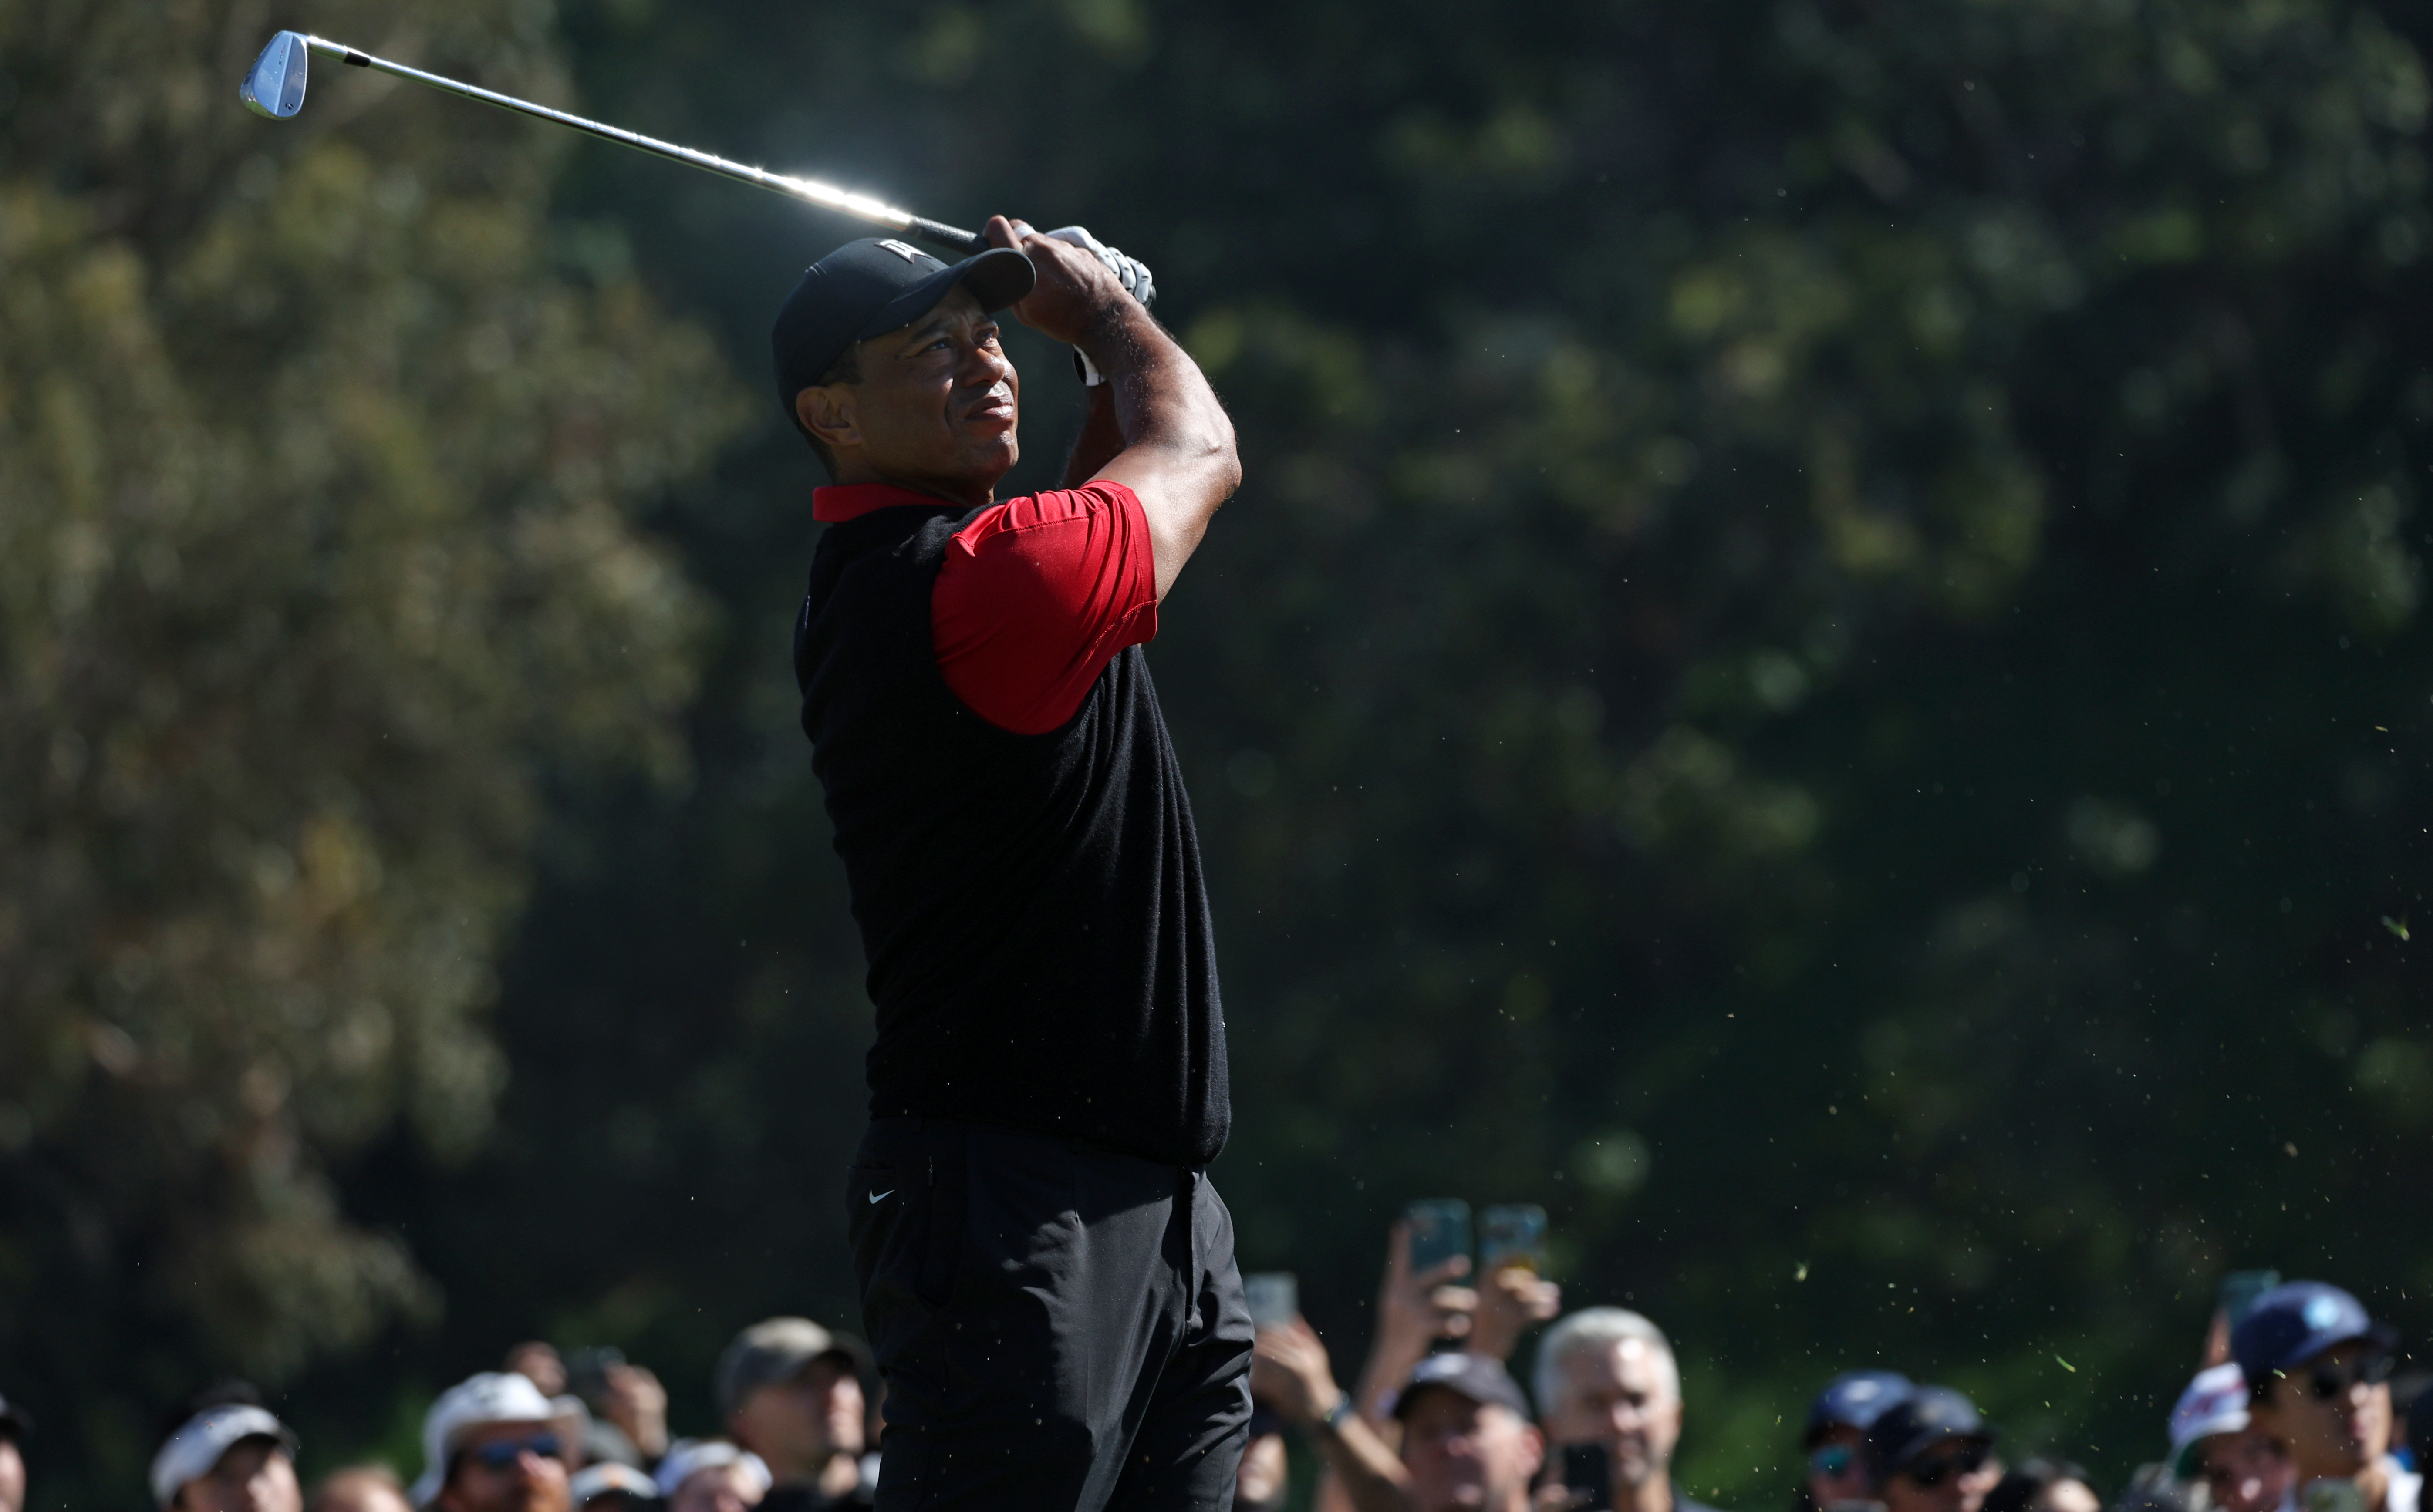 Tiger Woods Sued For $30 Million By Ex-Girlfriend: Details